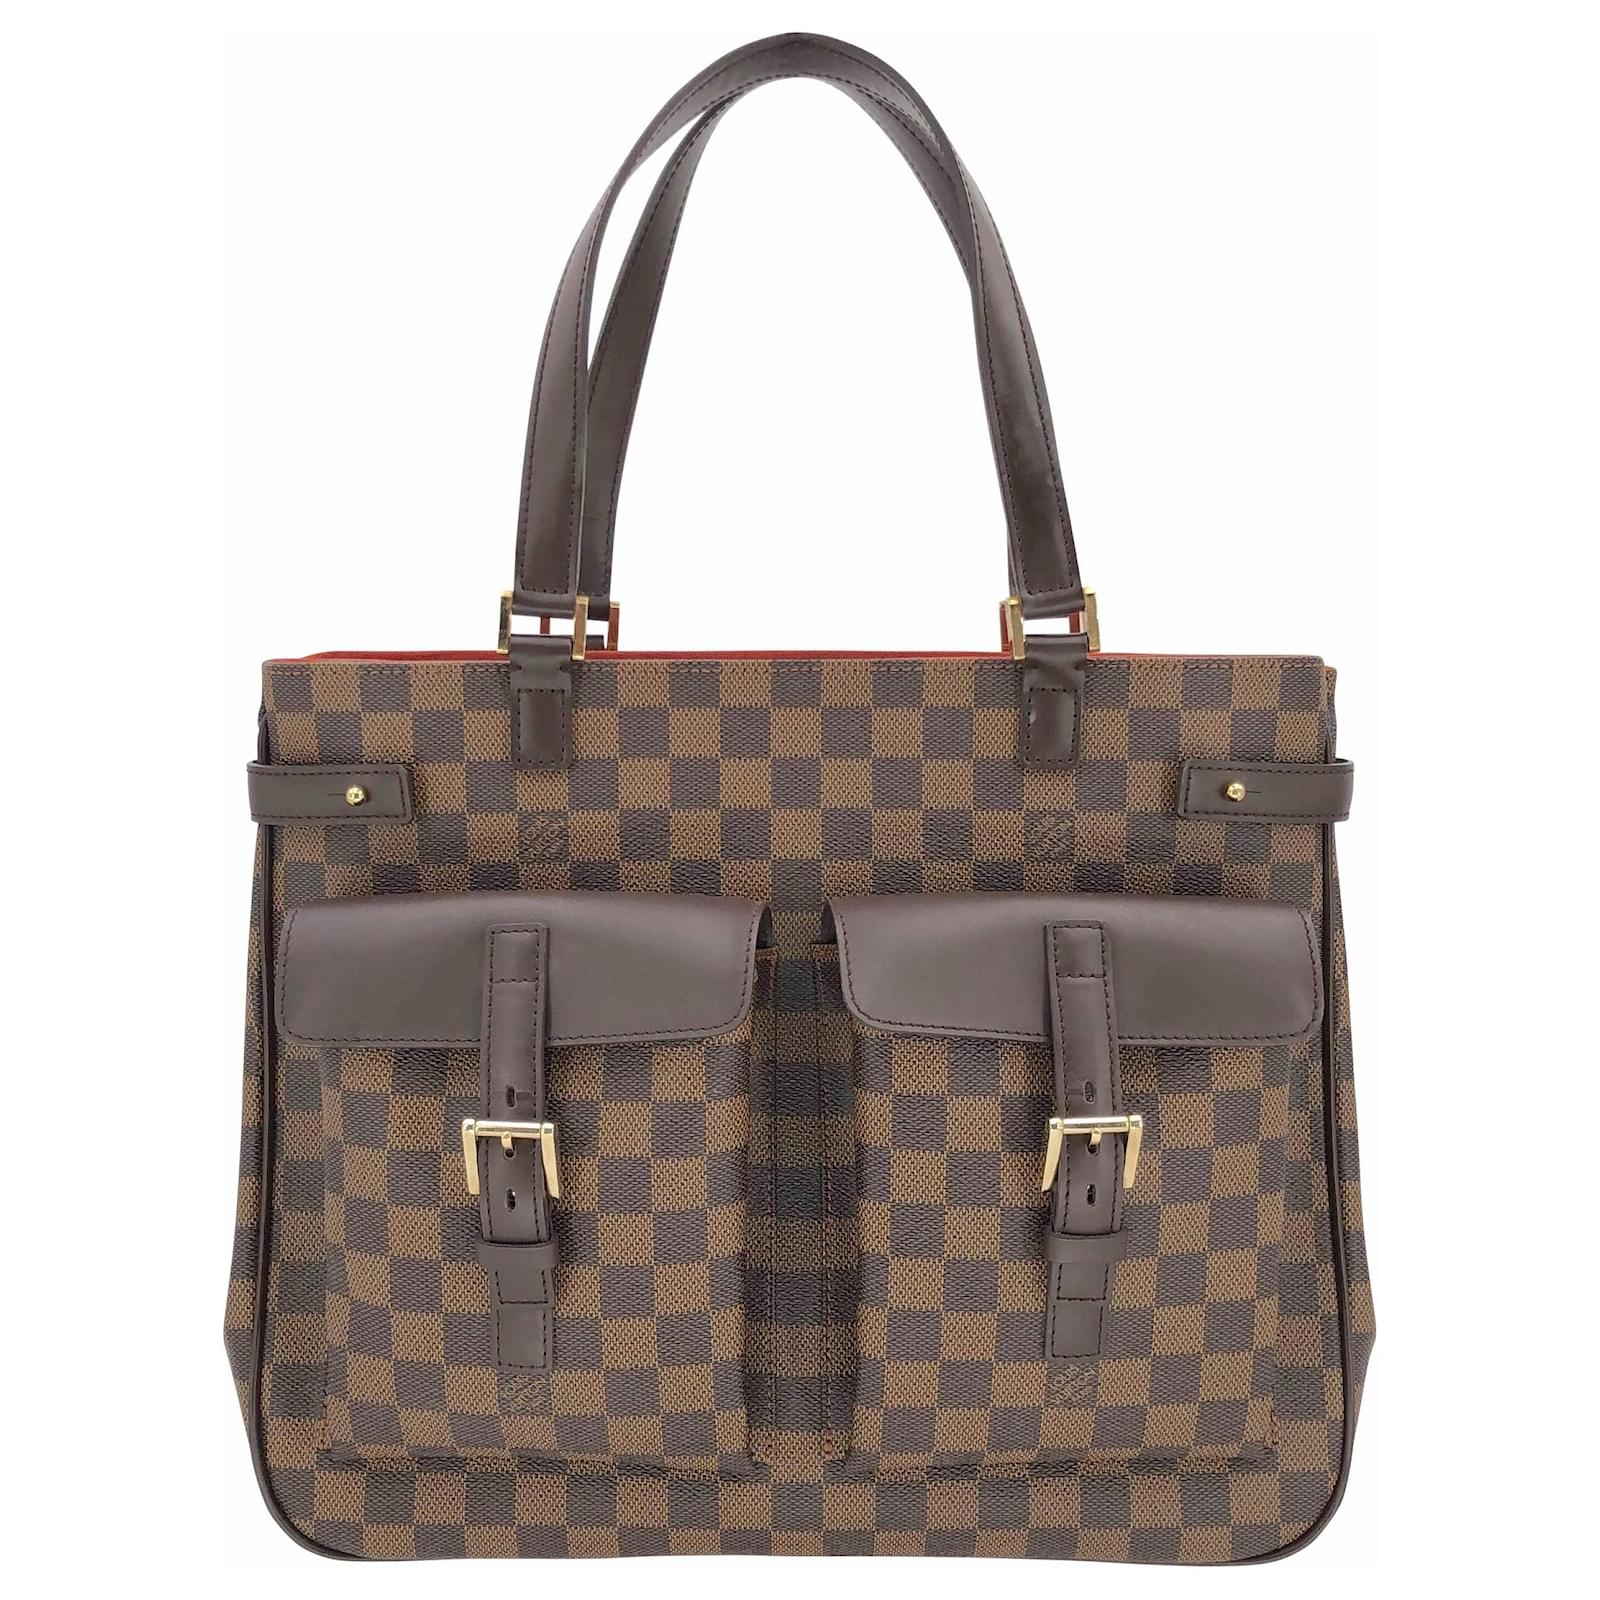 louis vuitton bag with front pocket